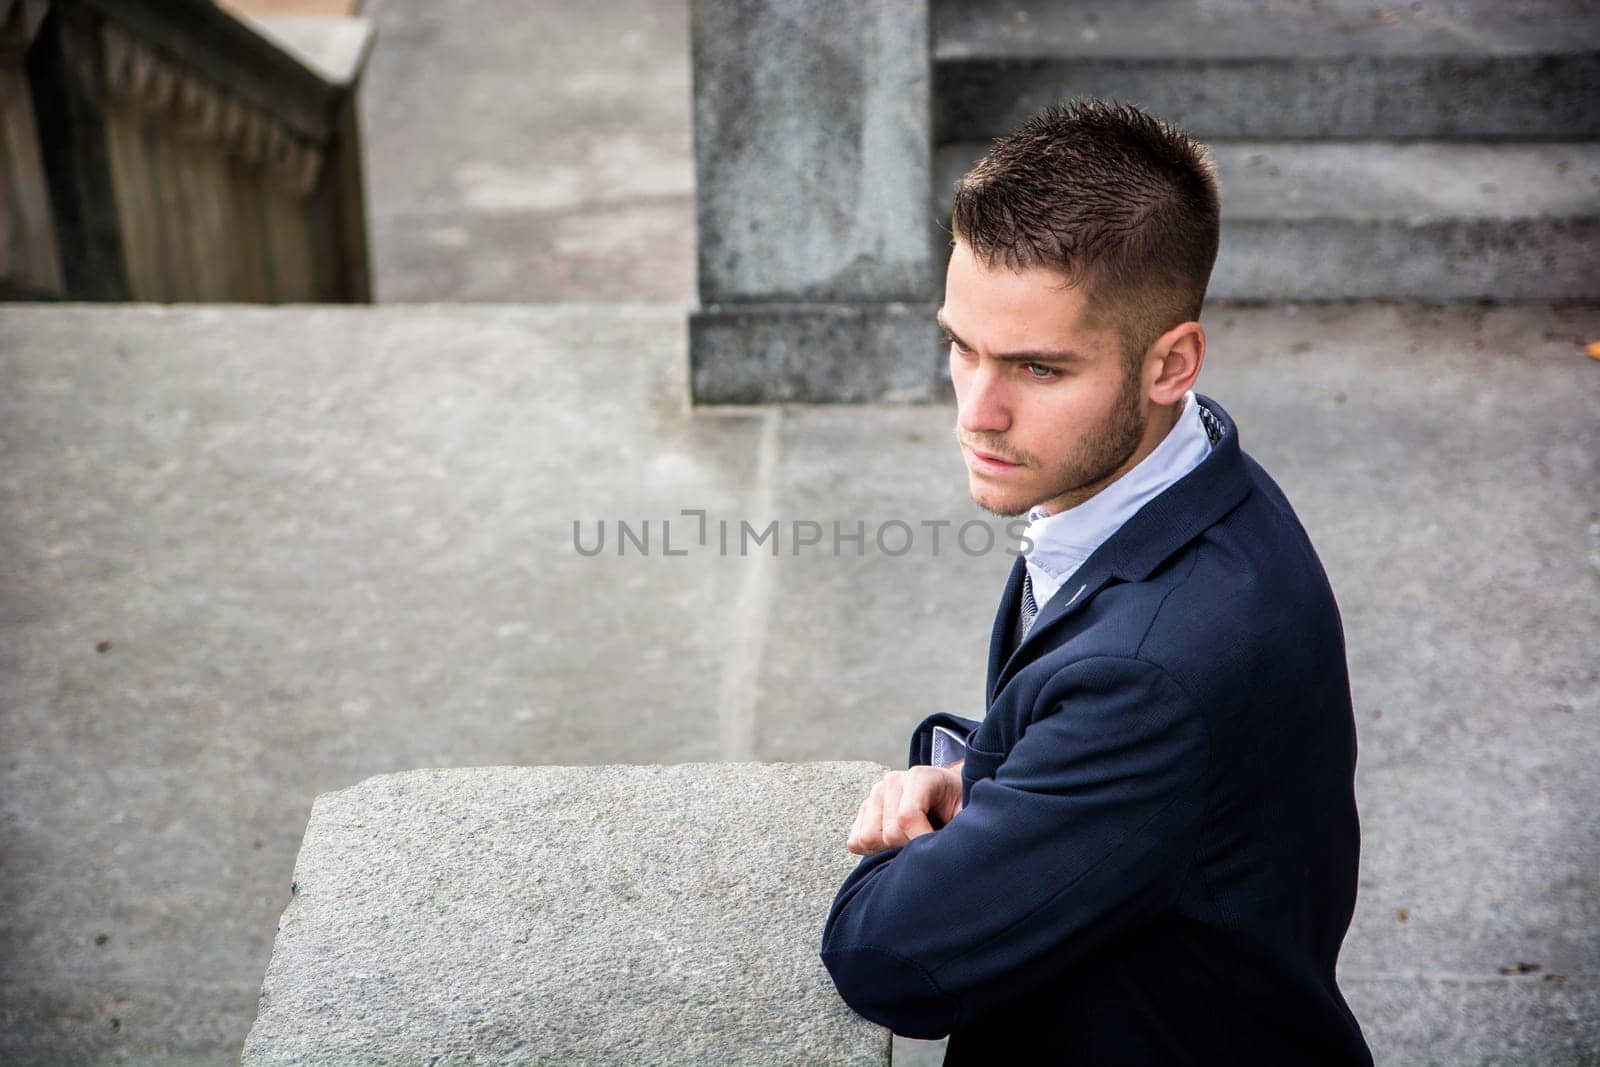 Photo of a stylish man in a suit posing against a textured stone wall by artofphoto